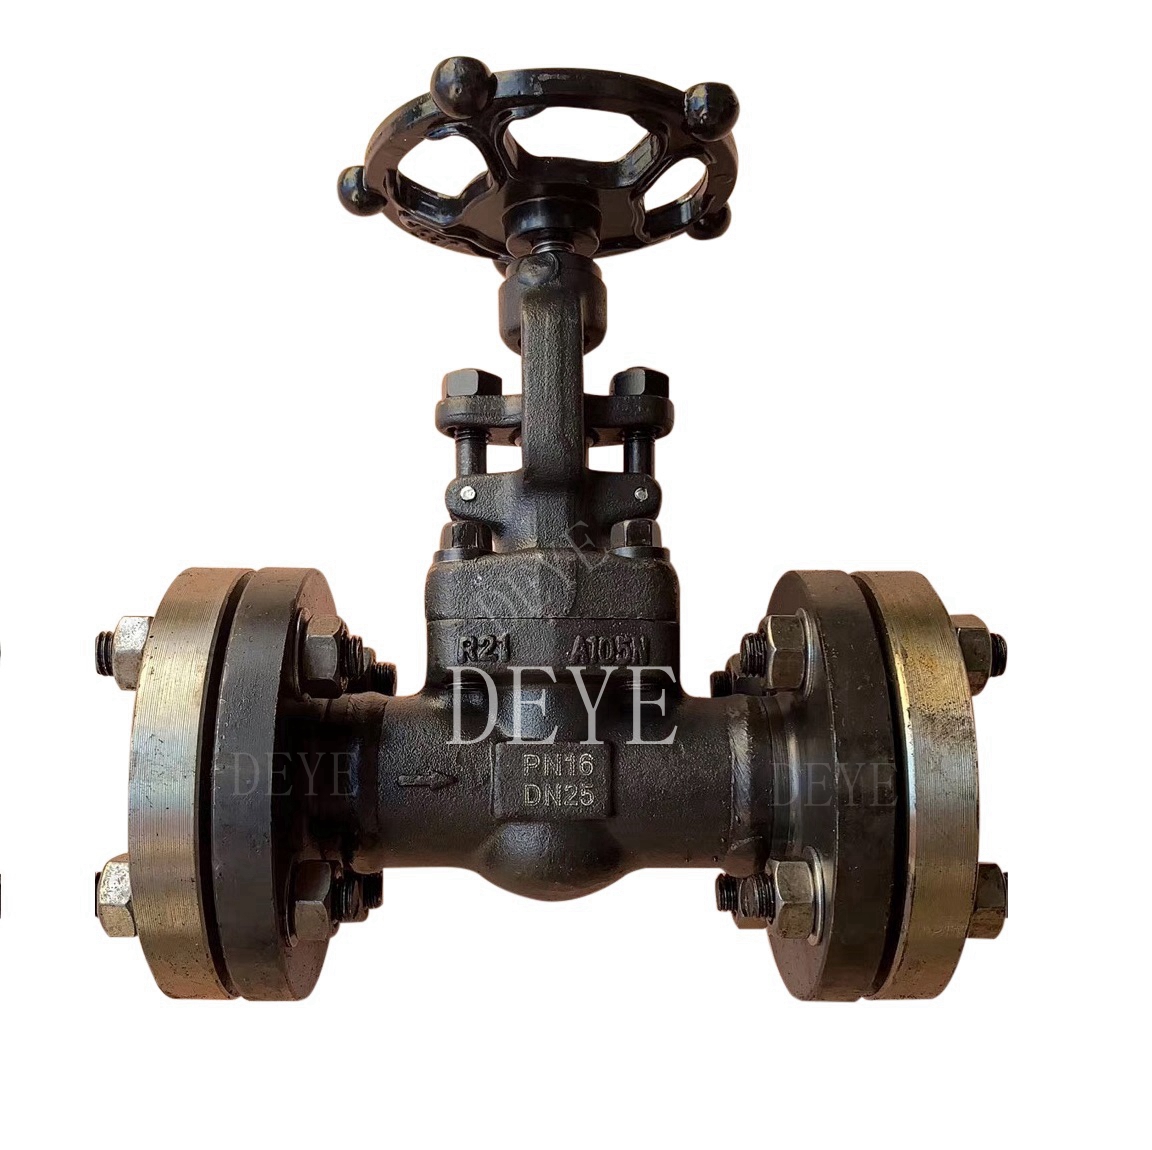 Popular Design for 900lbs Tm Ball Valve -
 A105 Forged steel Gate Valve with counter flanges GVC-0016-1F – Deye